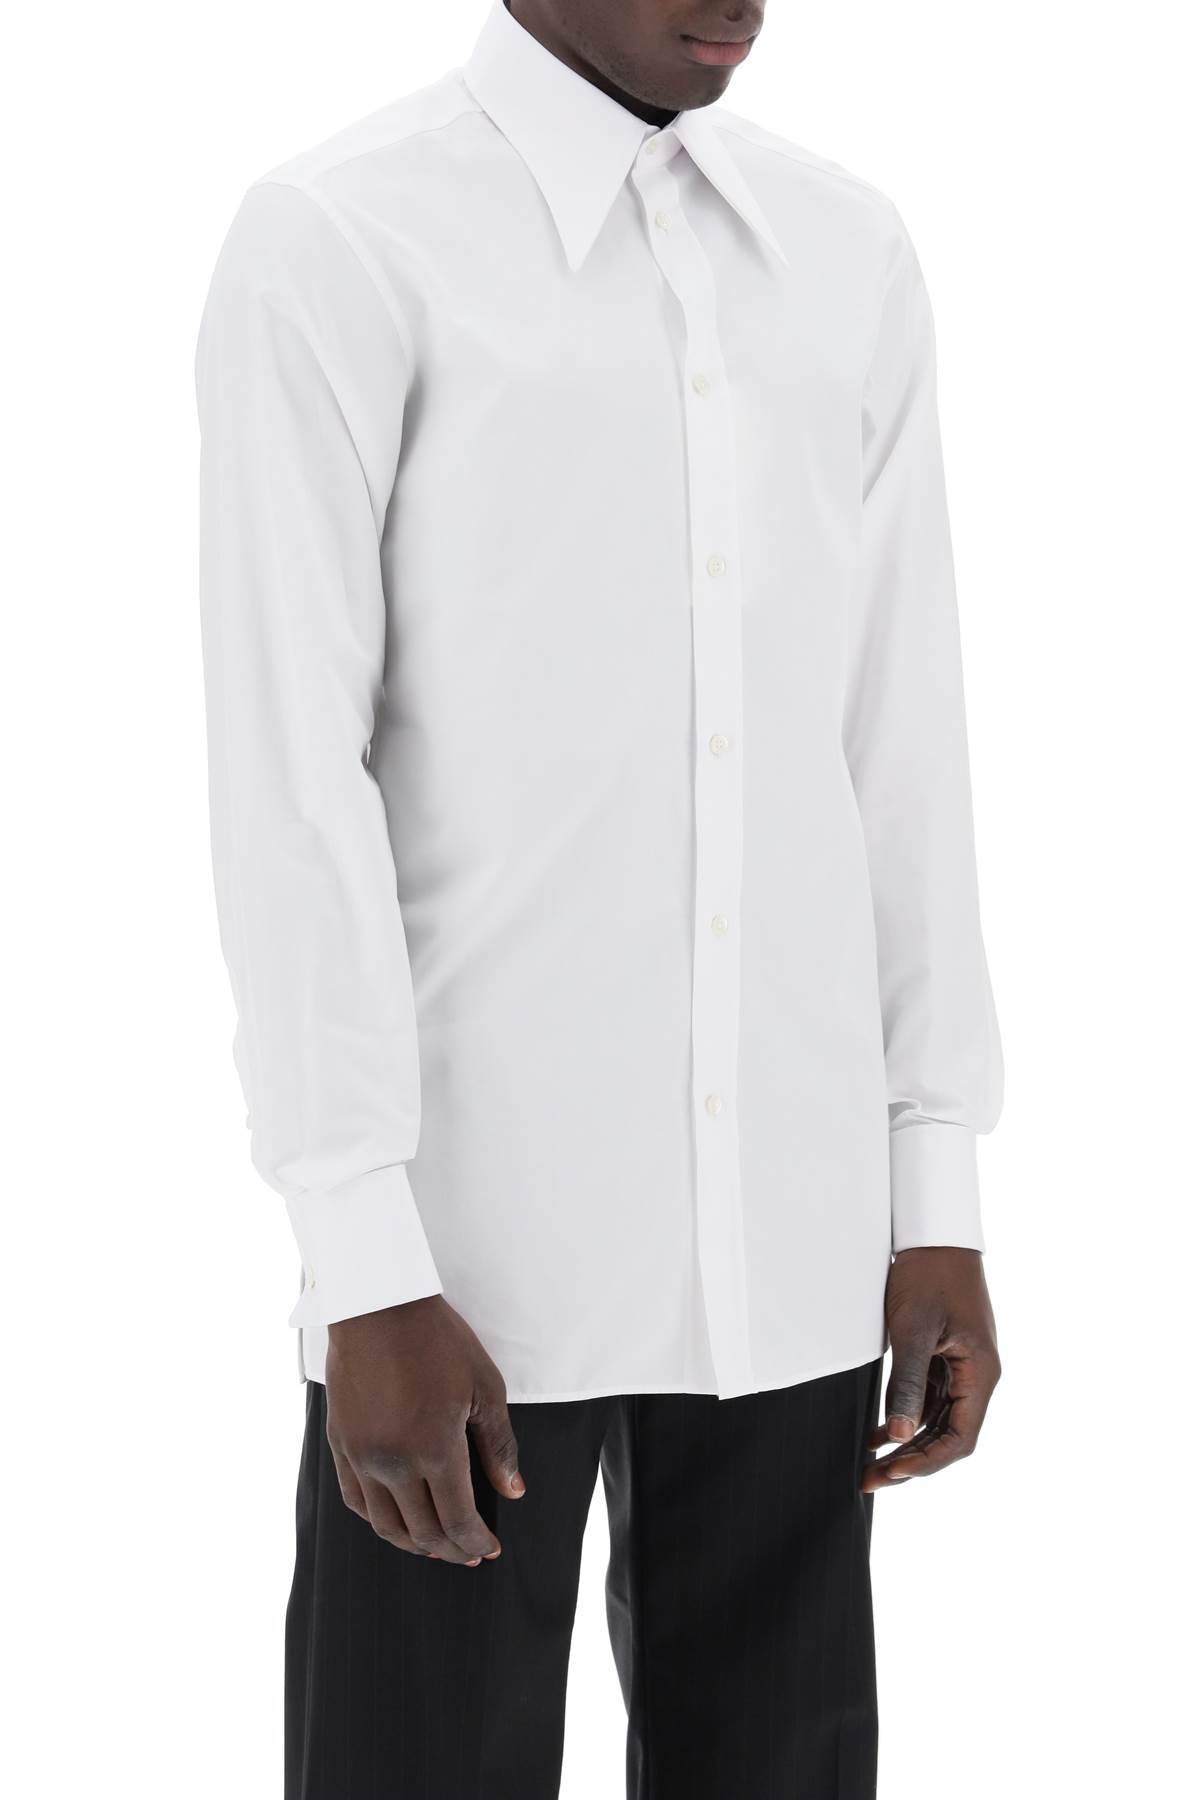 Maison margiela "shirt with pointed collar"-1